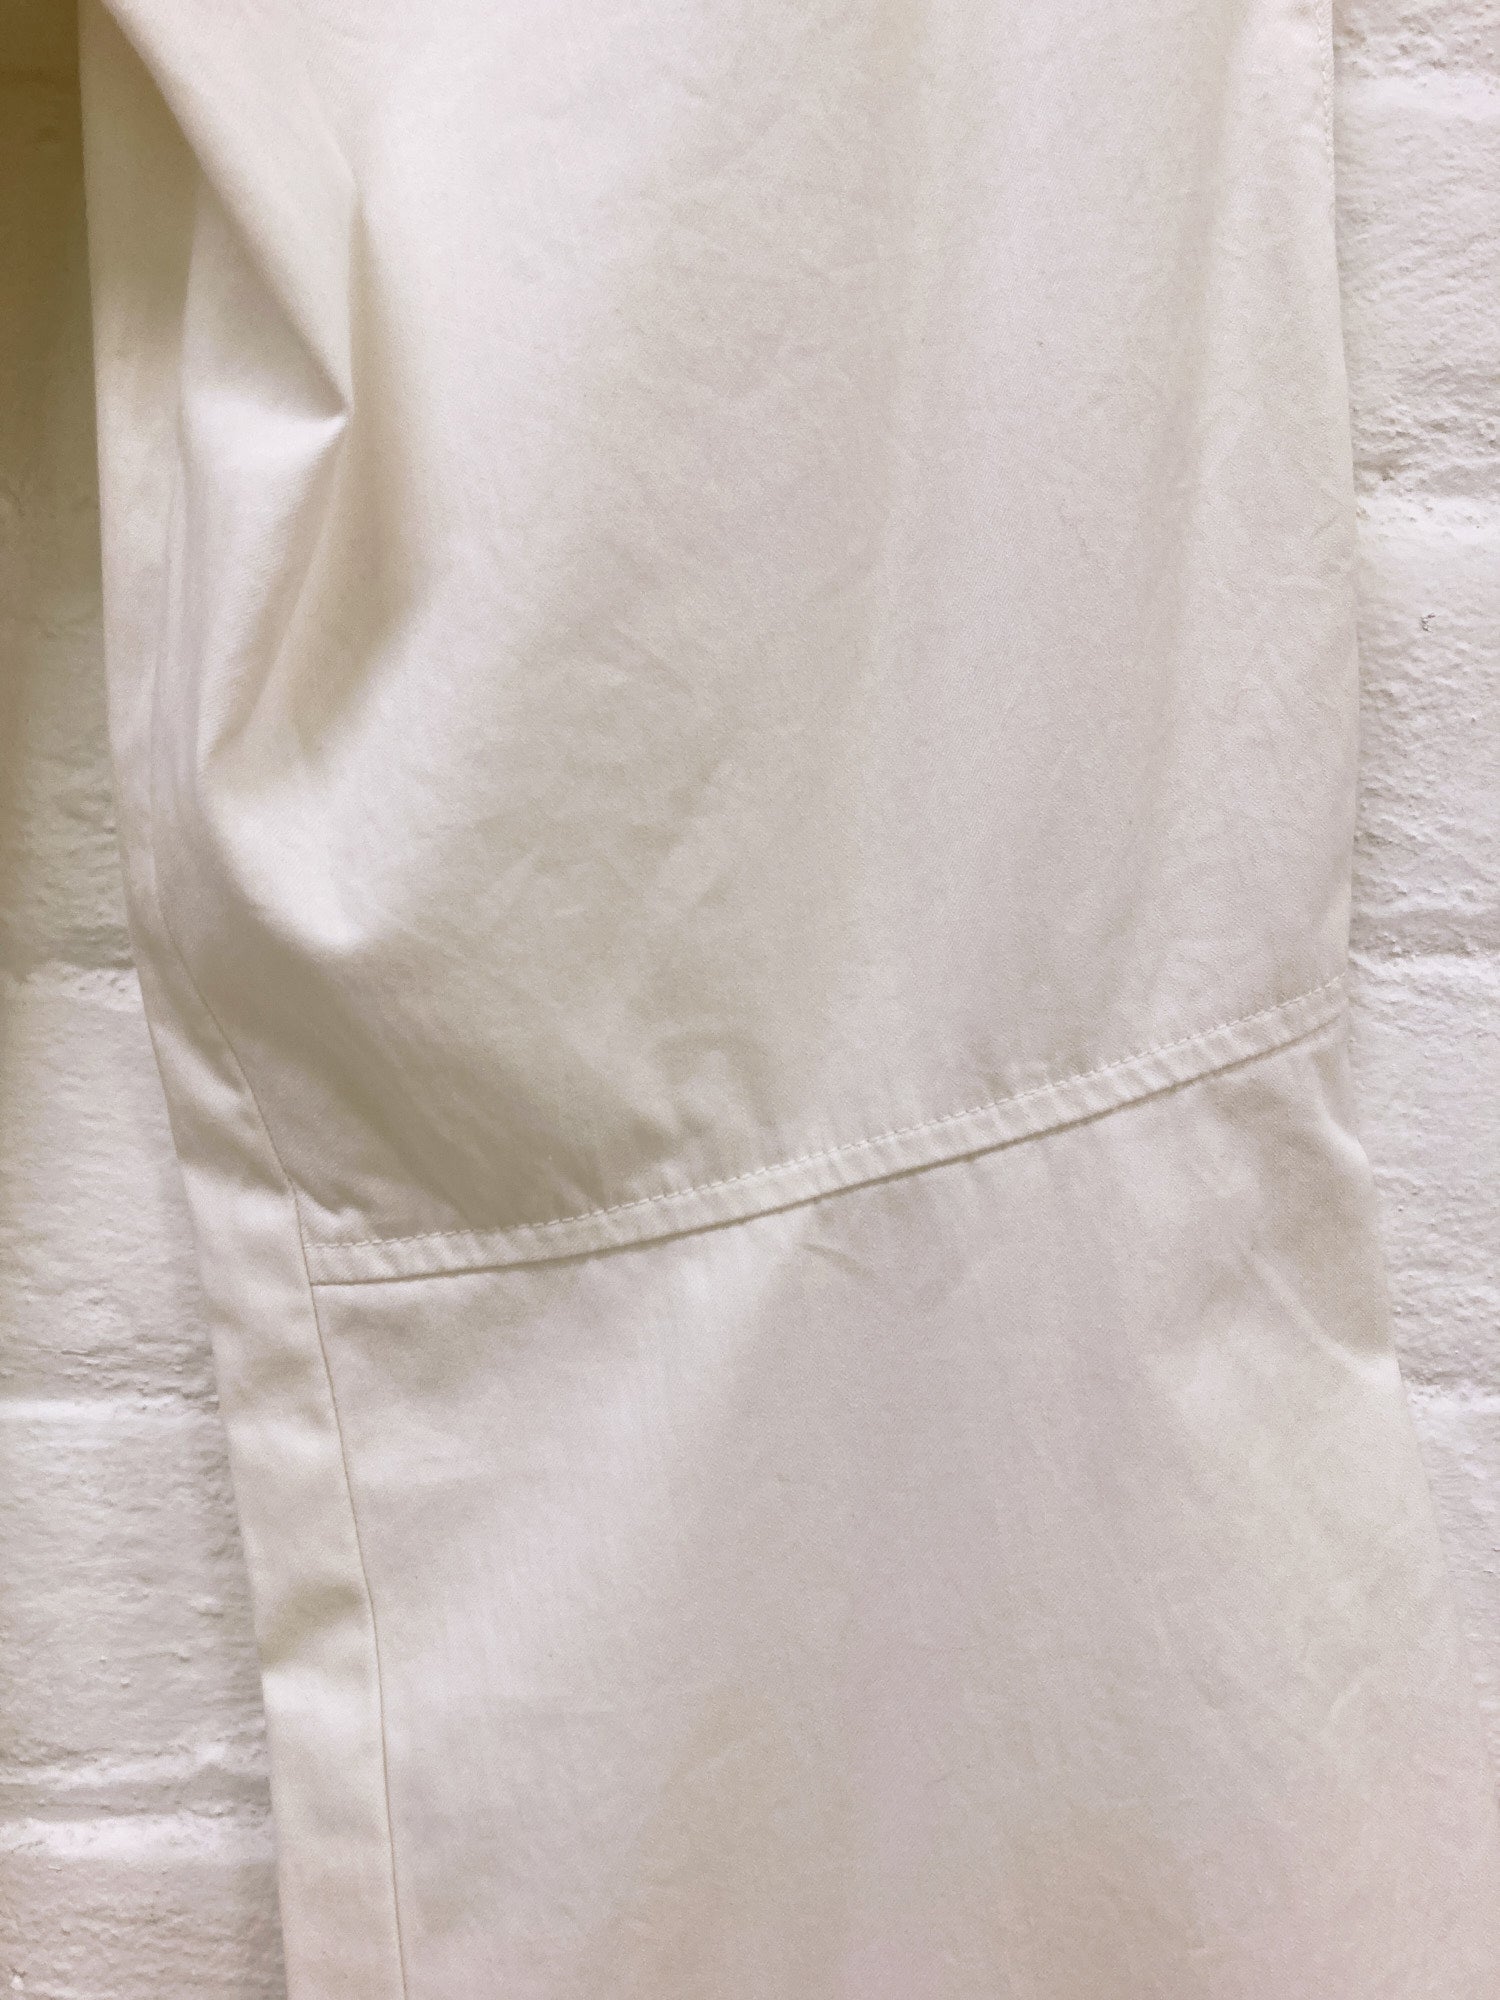 Le Jean de Marithe Francois Girbaud white cotton flared chinos - size 48 32